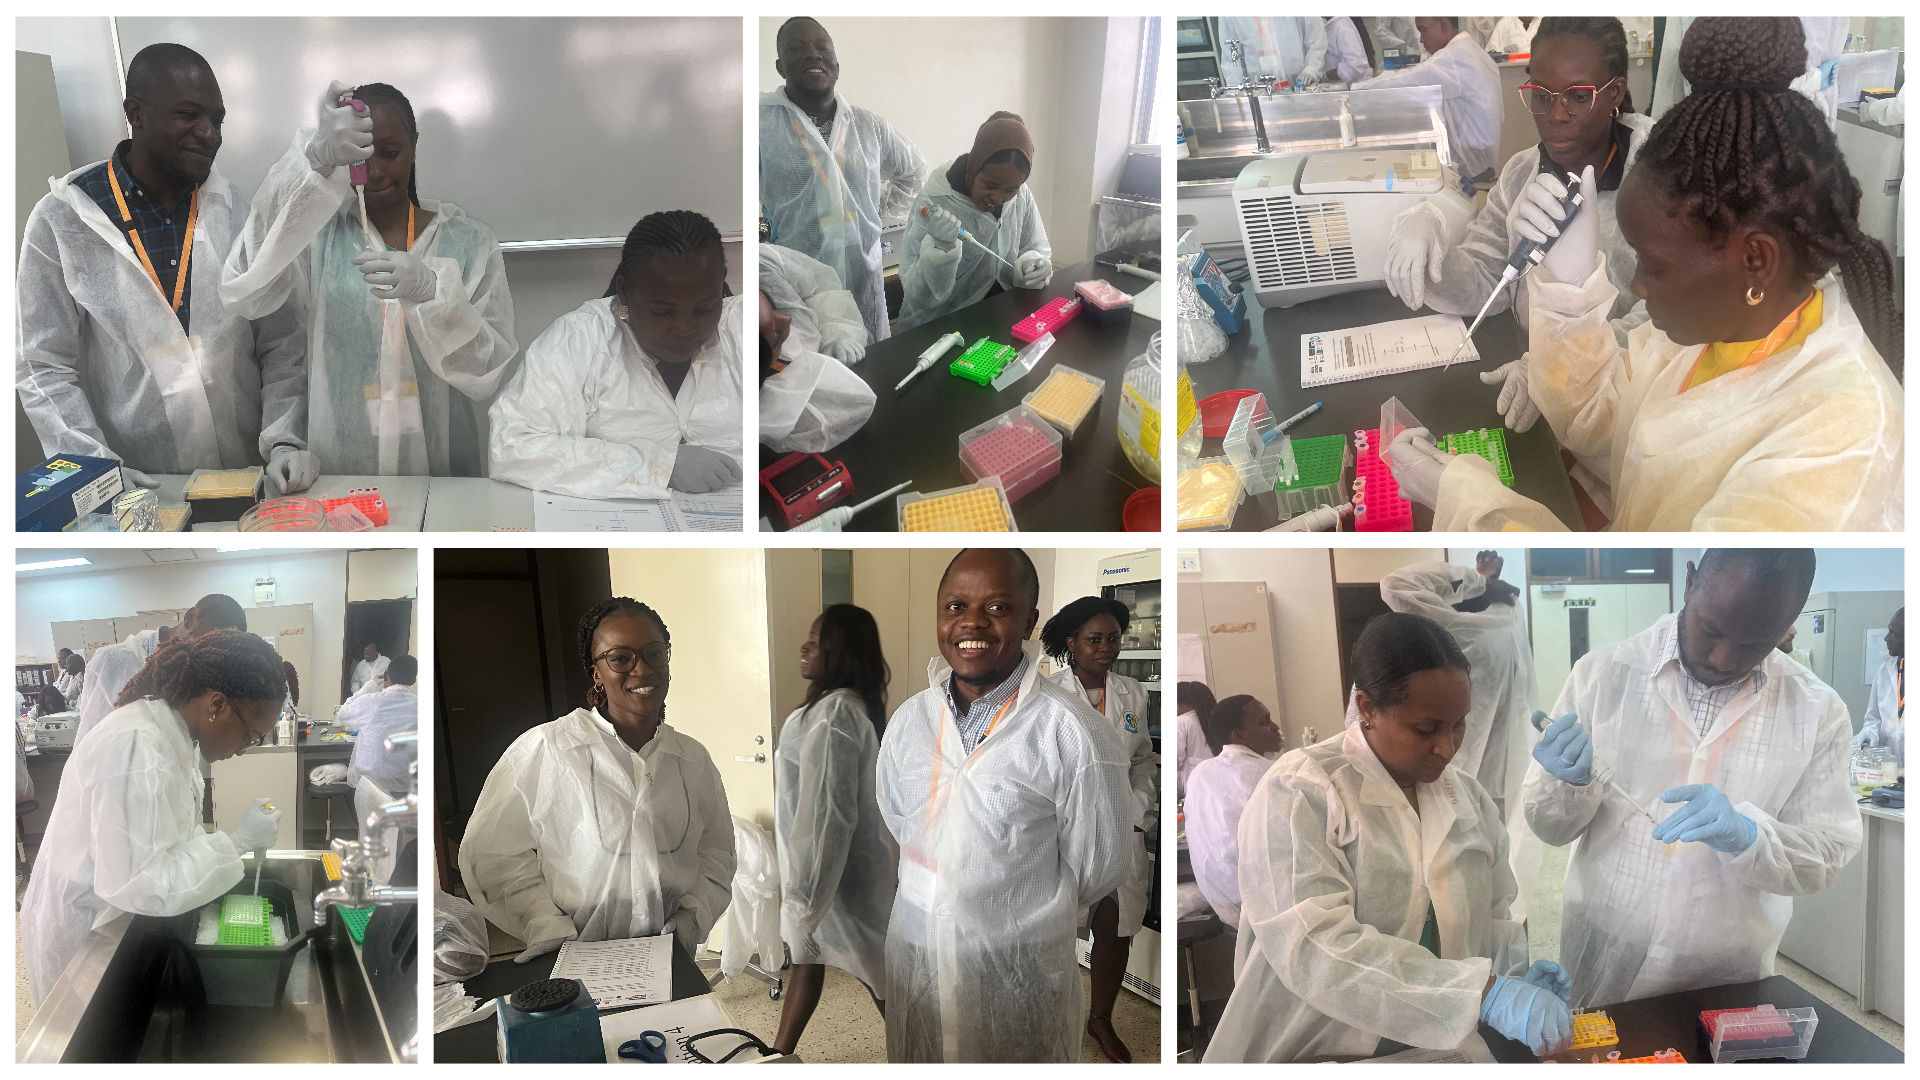 Clinical Microbiology course participants taking part in a sponsored pipette masterclass, in a KEMRI training lab facility. 